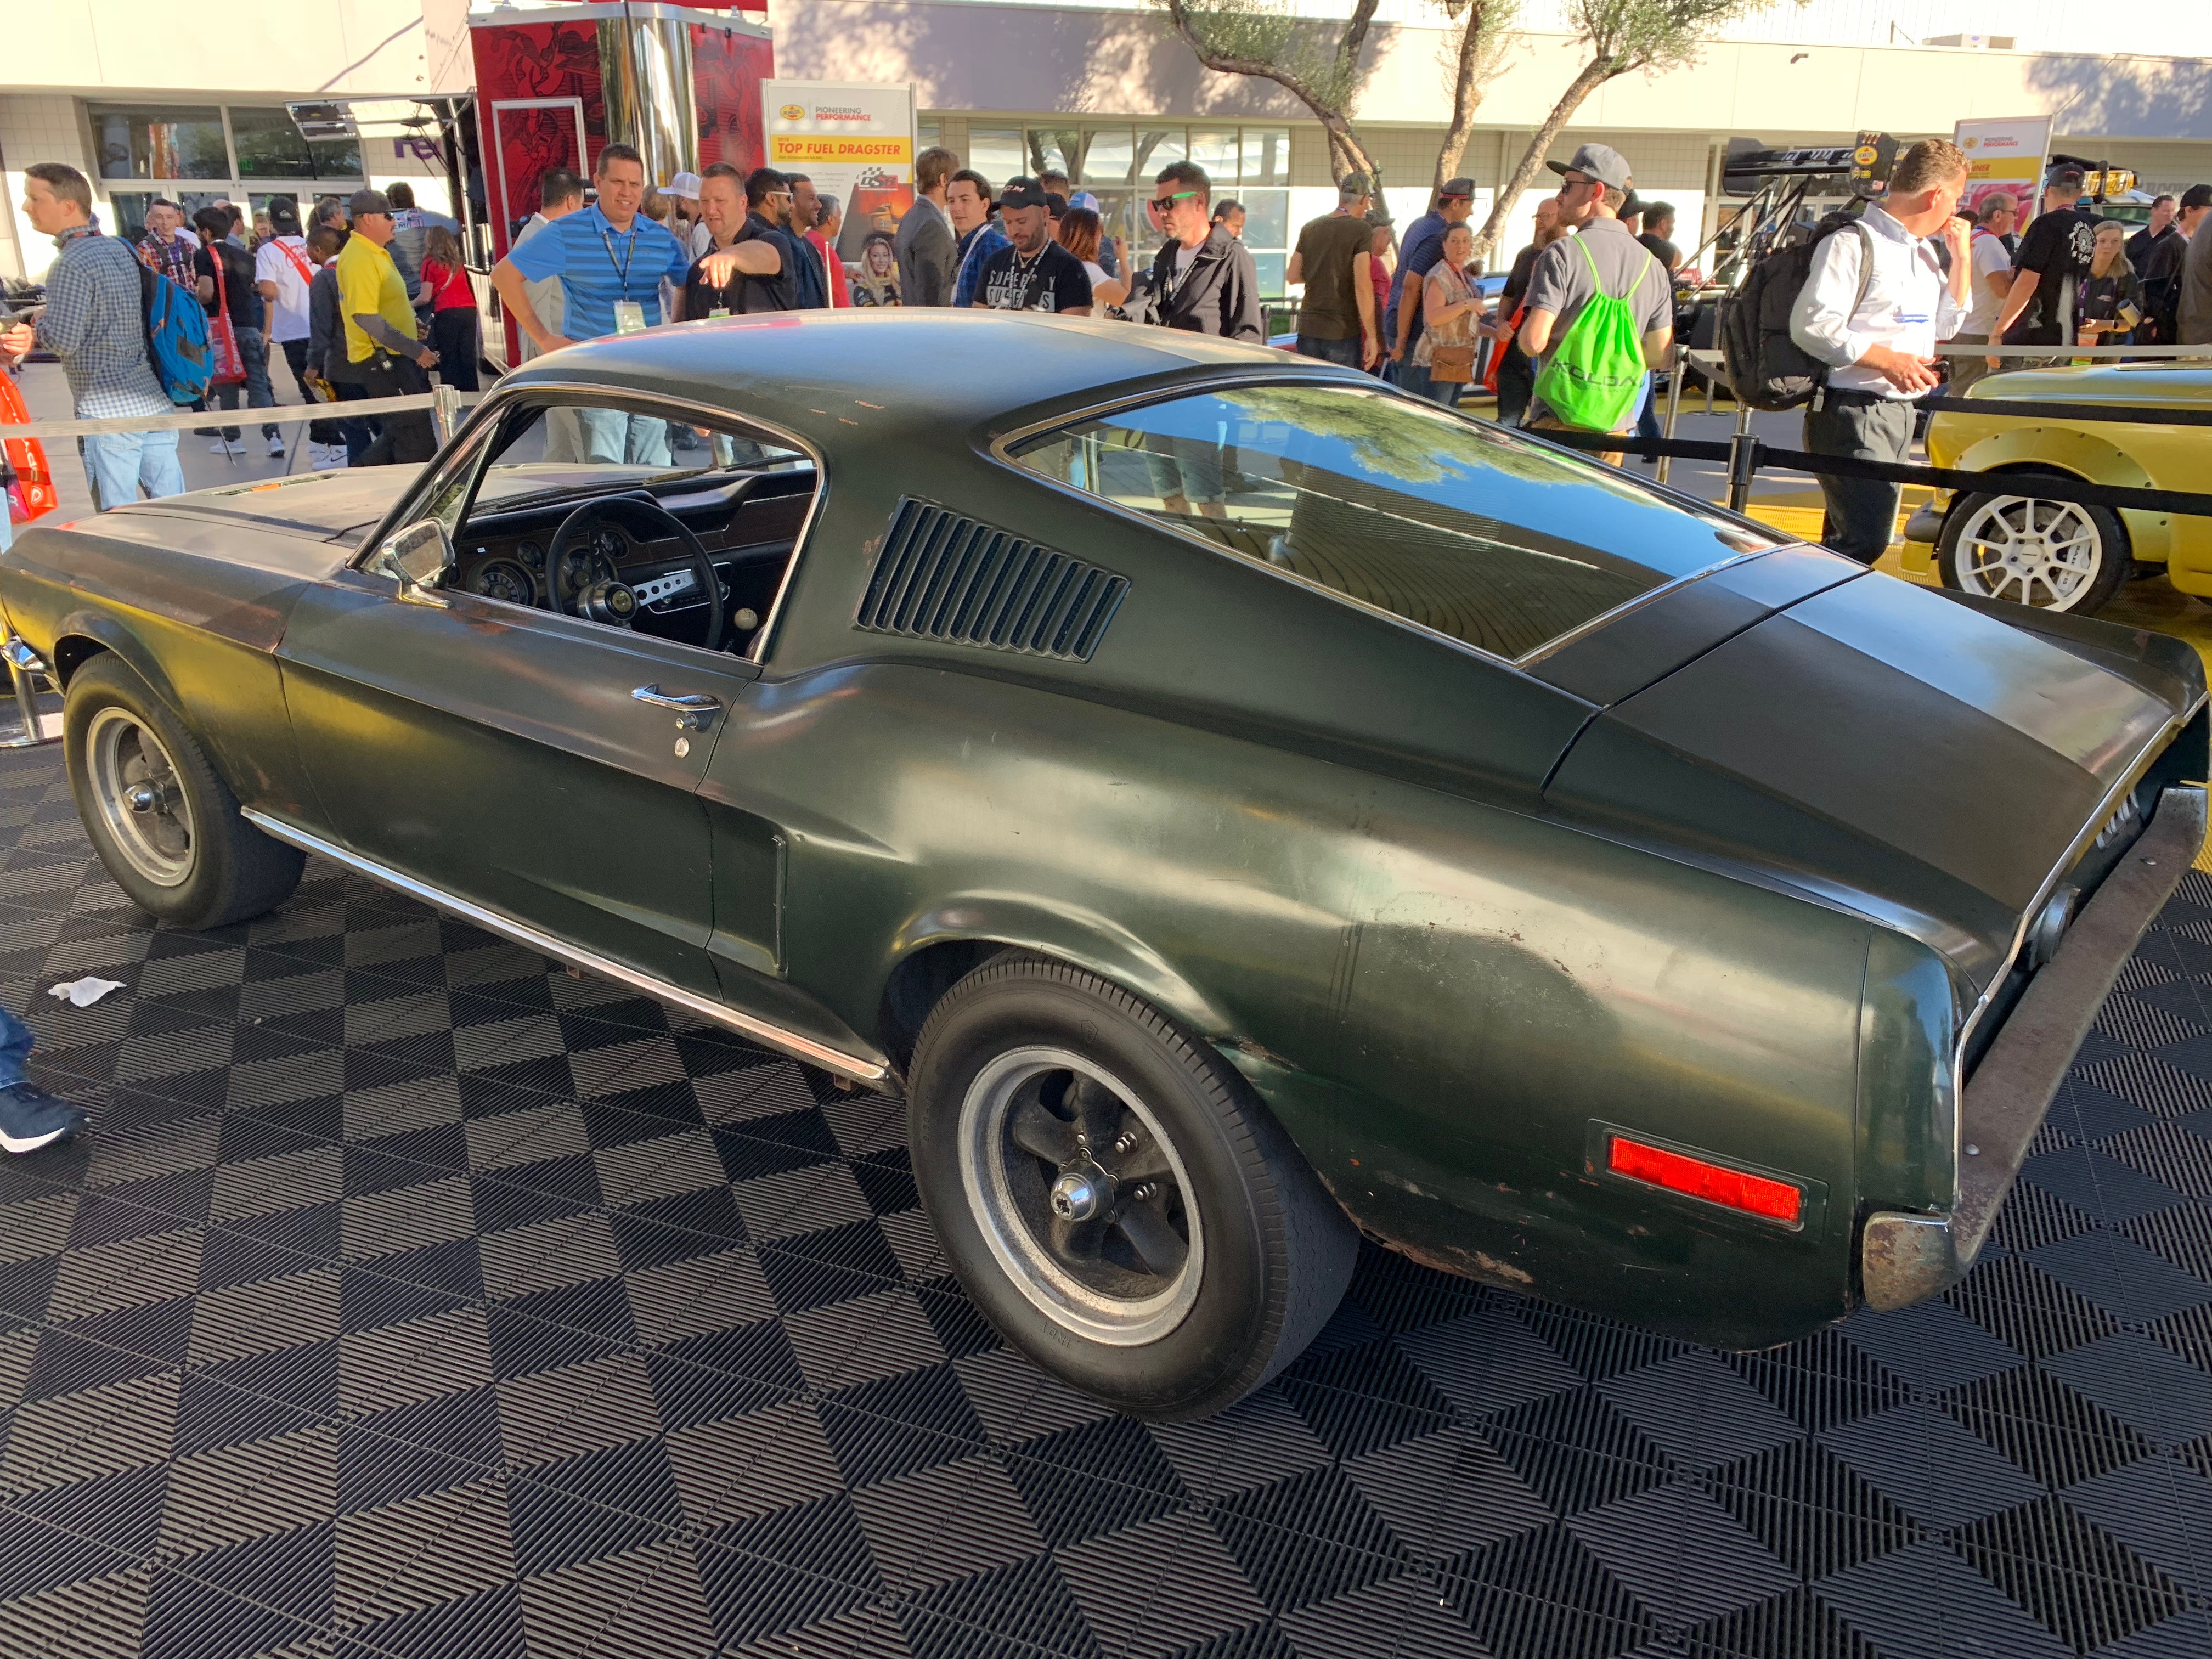 The 2018 SEMA Show was hardly the last chance to see the original Bullitt Mustang. | Carter Nacke photo